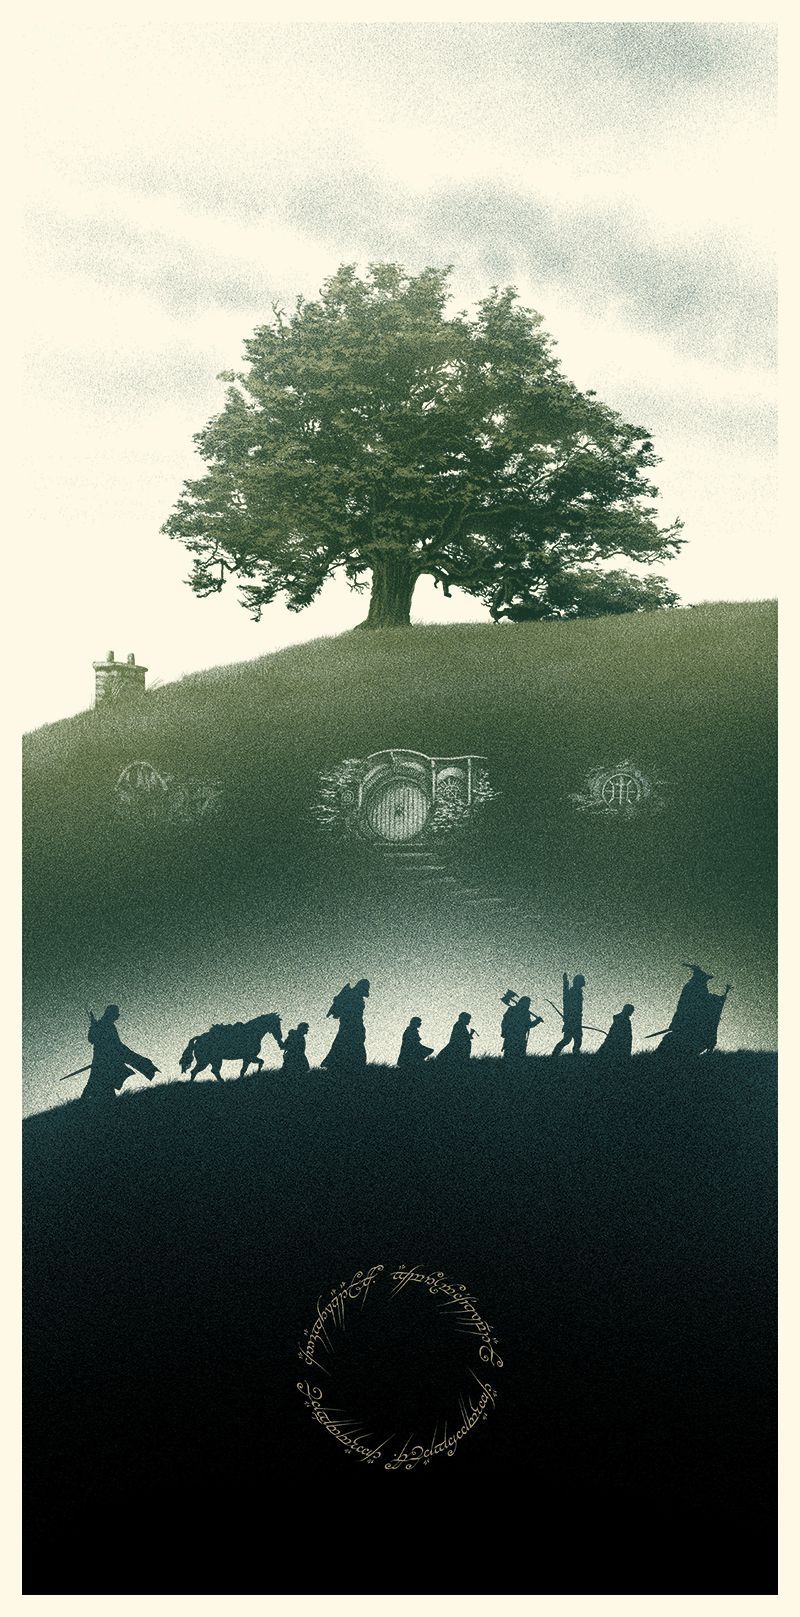 Amazing LORD OF THE RINGS Poster Art!. Lord of the rings, Middle